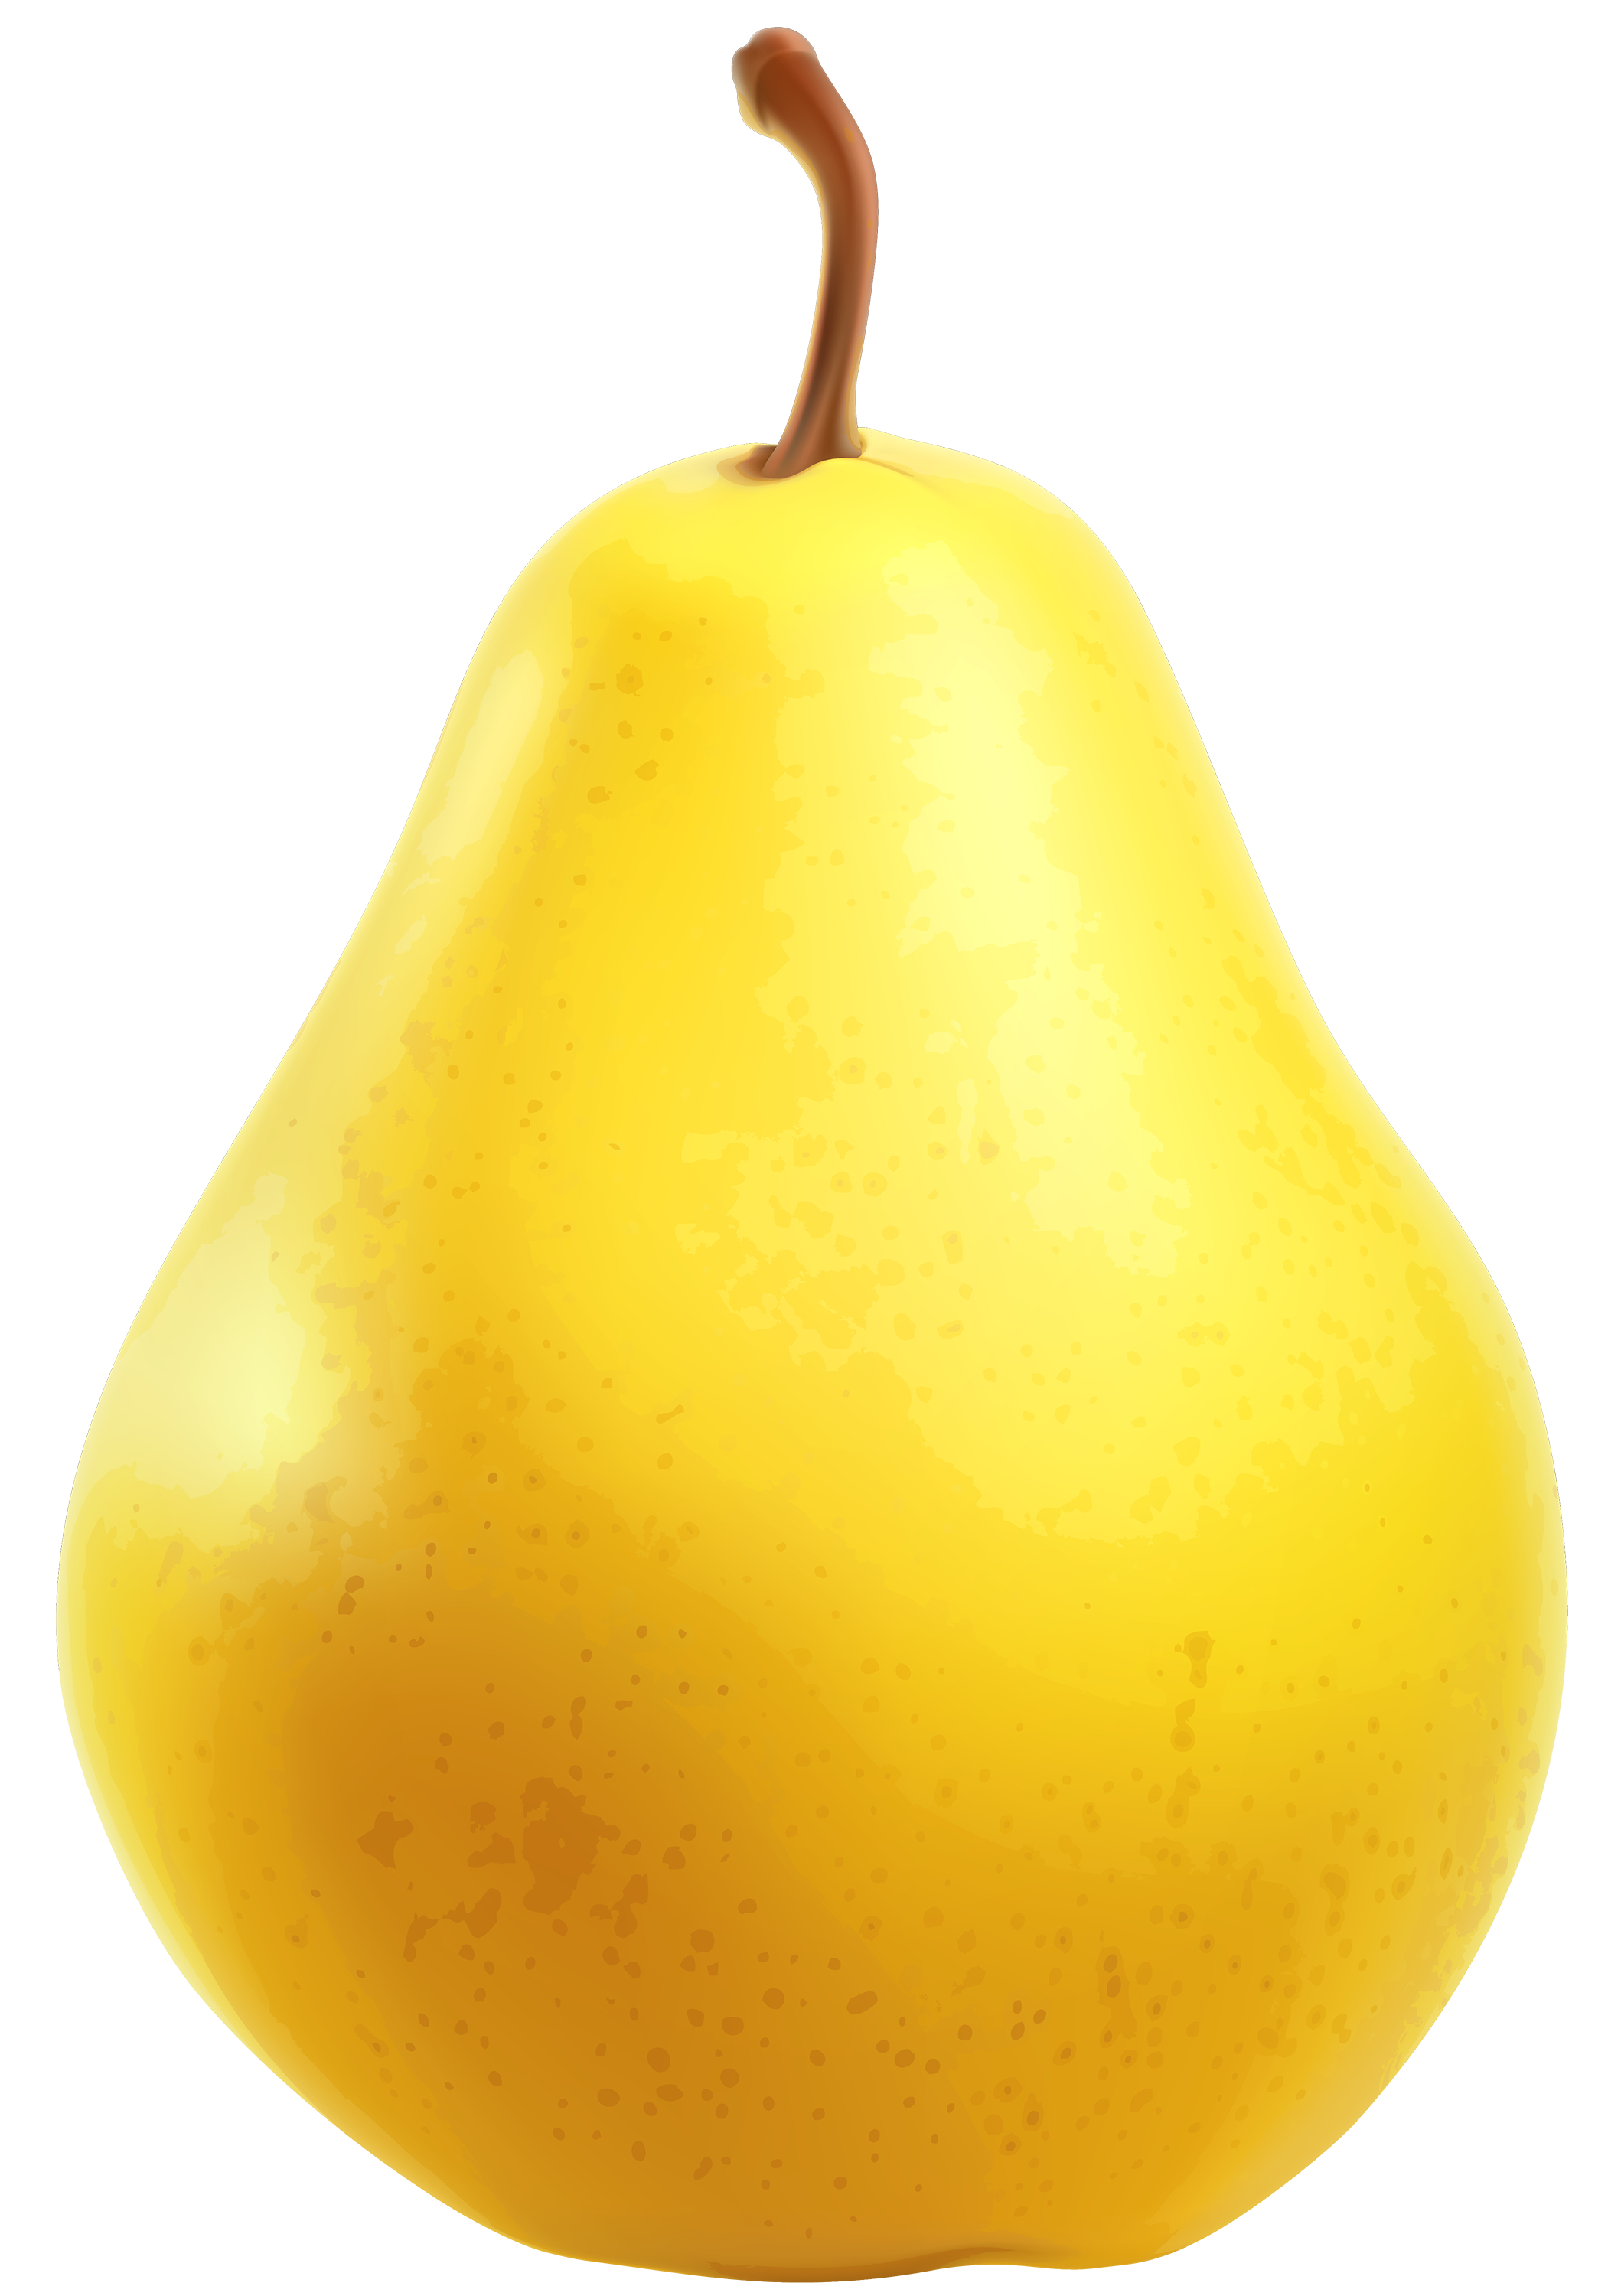 Yellow Pear PNG Clipart - Best WEB Clipart